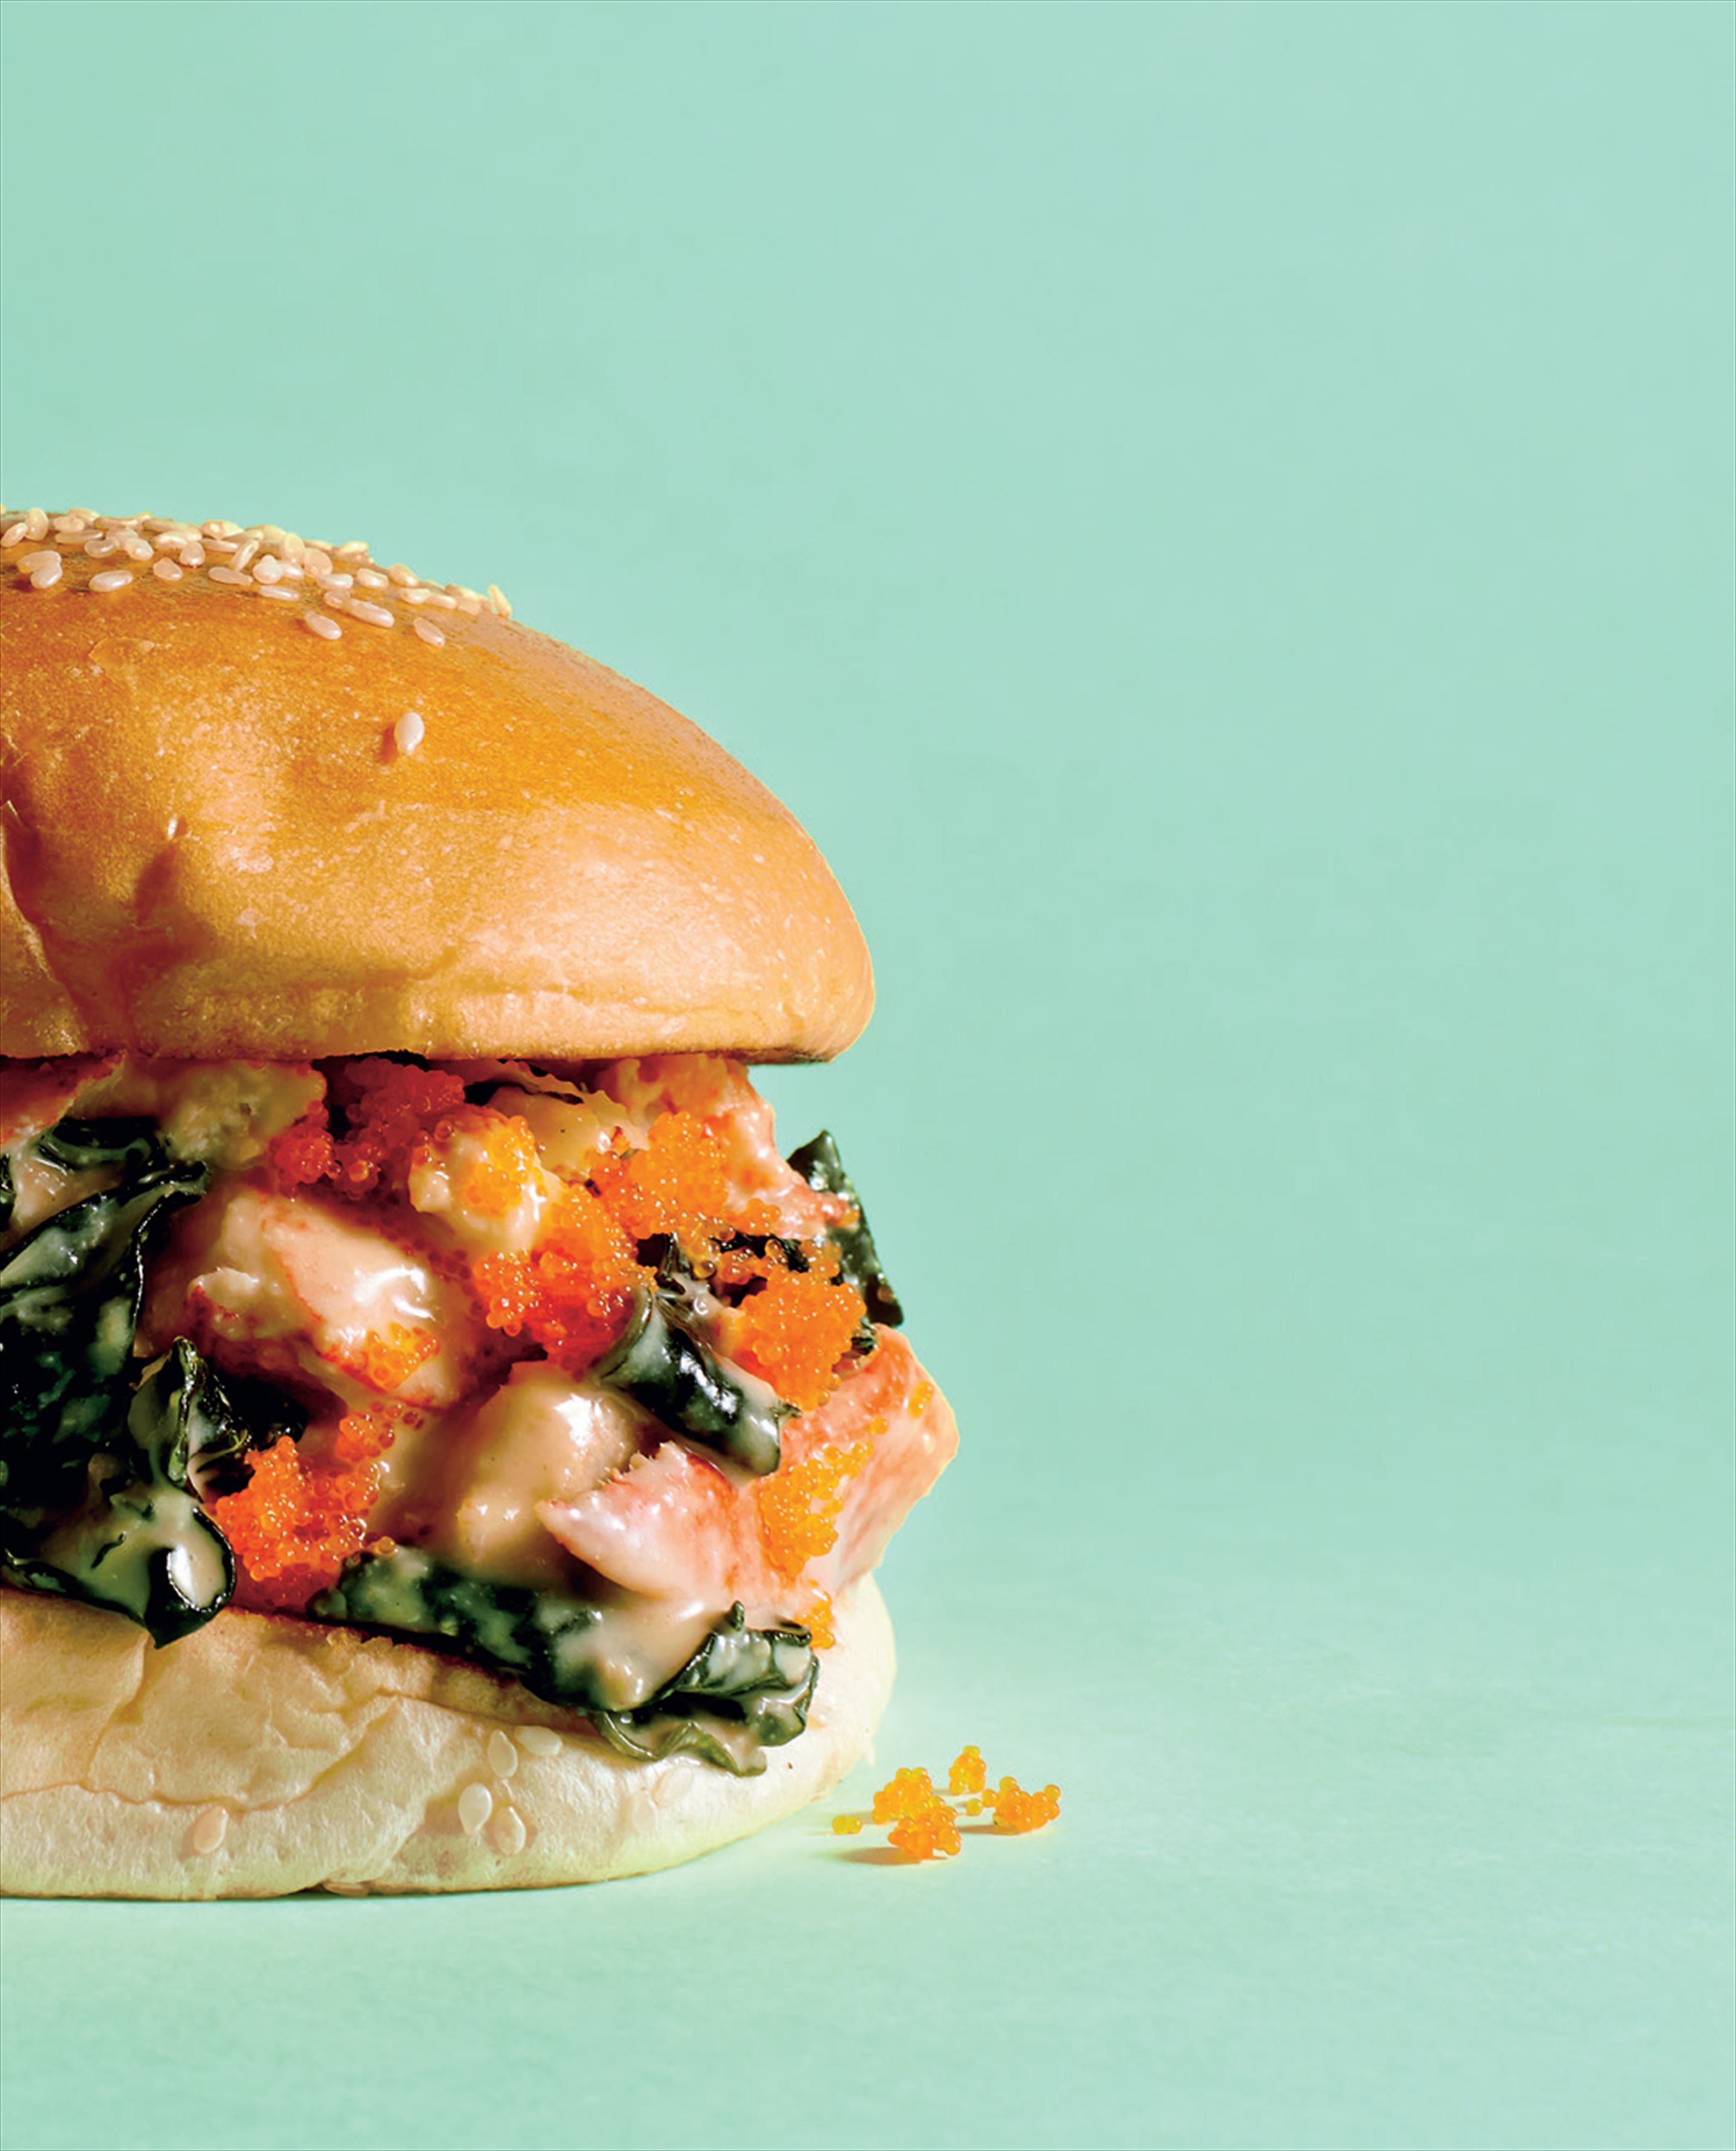 Lobster burger with tobiko and wasabi & miso mayo